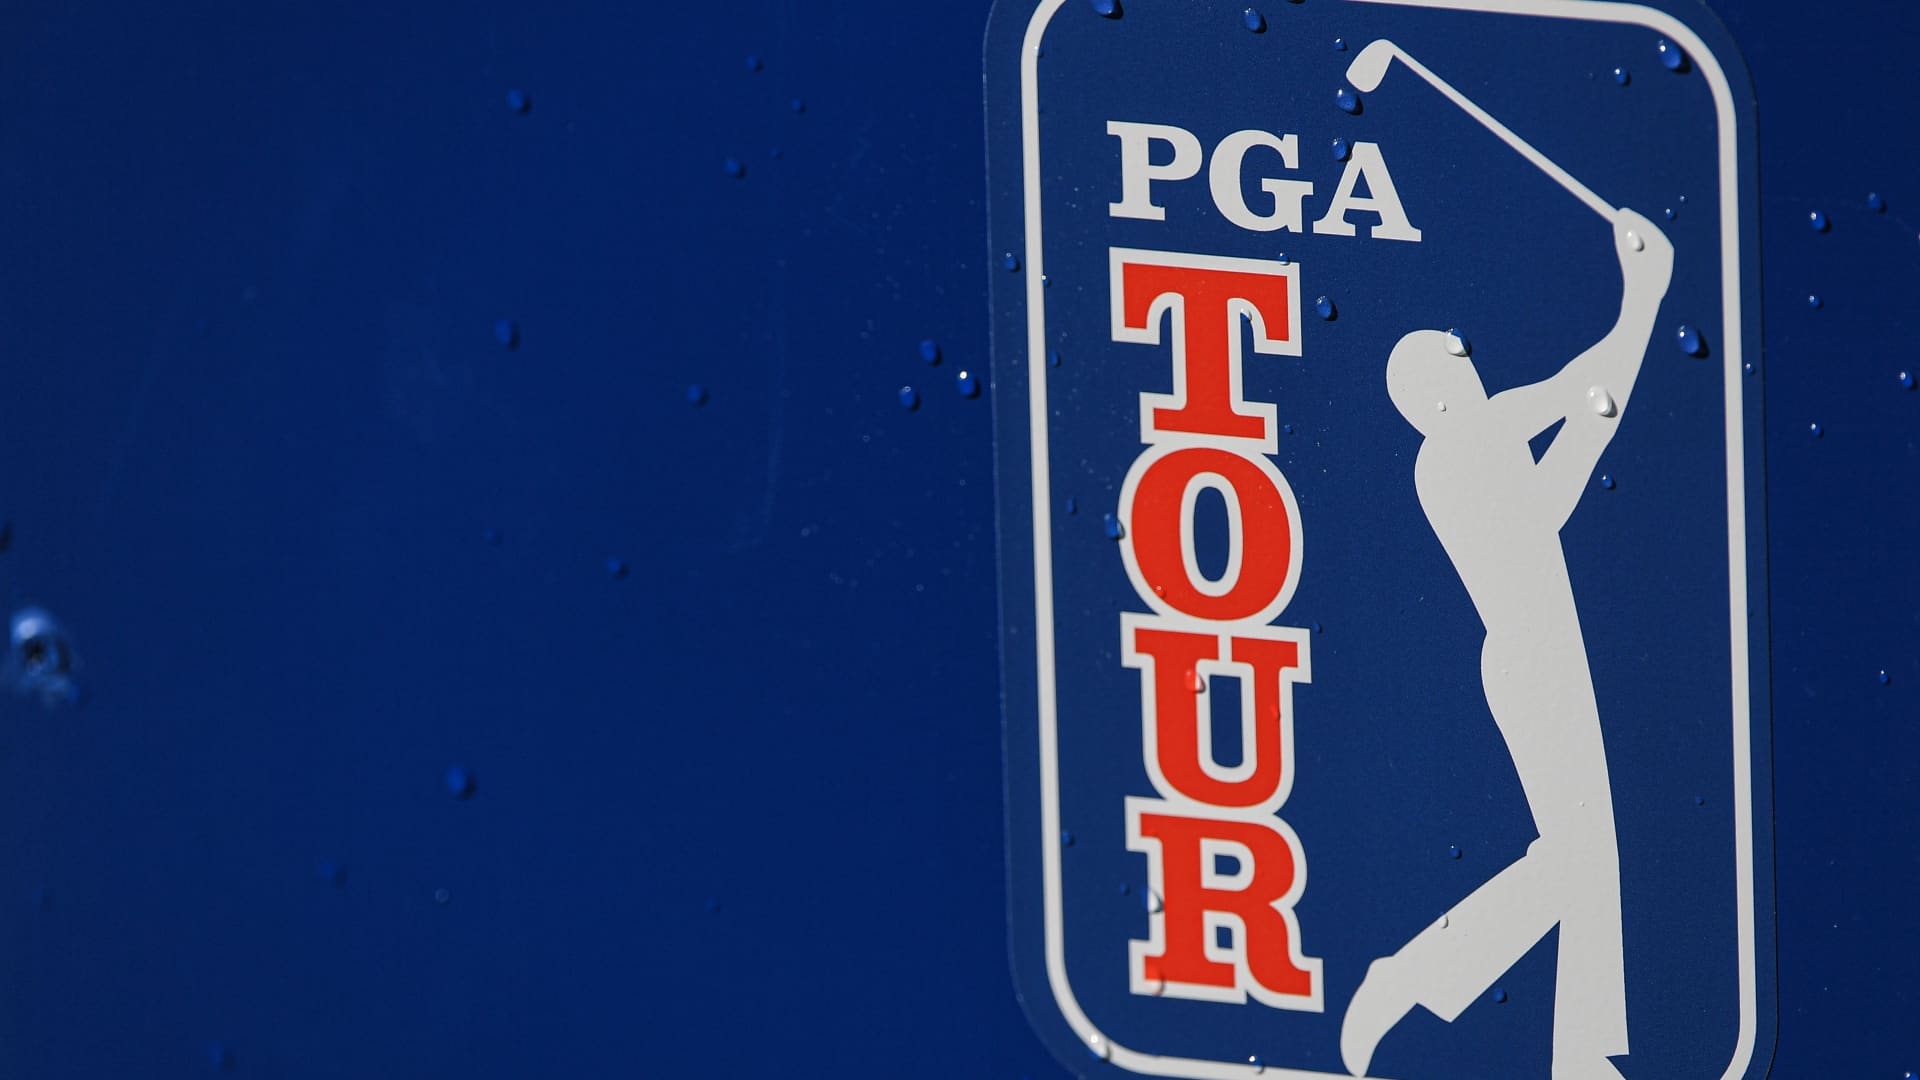 PGA Tour secures up to $3 billion from U.S. investors as LIV Golf merger hangs in the balance